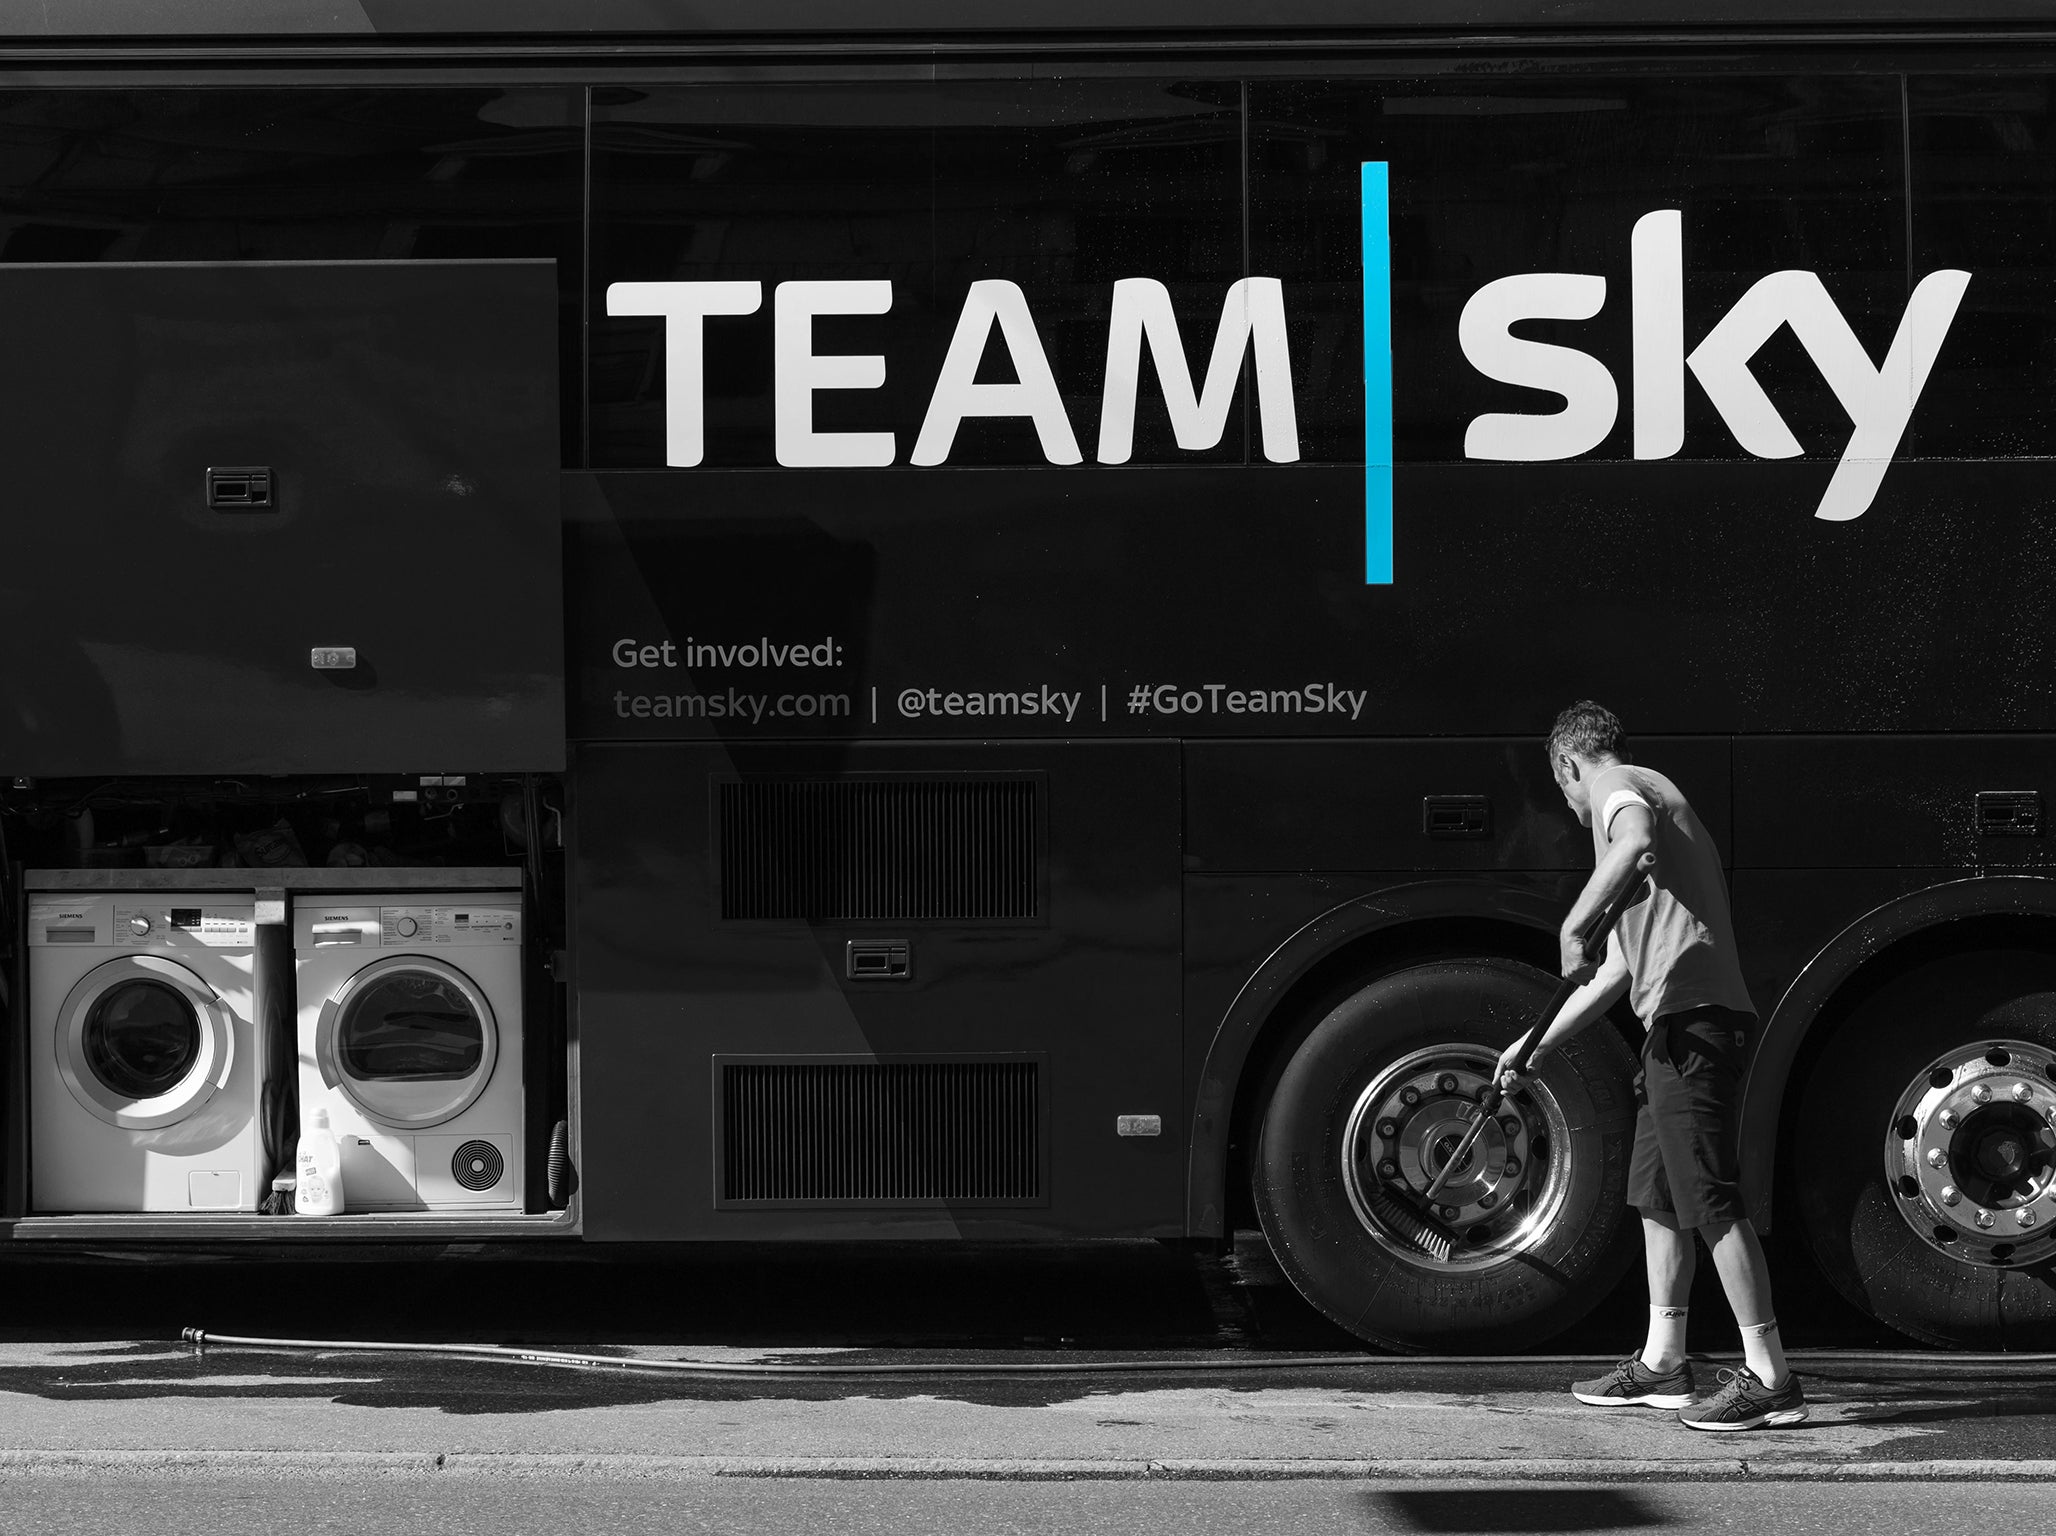 Dirty laundry: Team Sky's reputation is in tatters